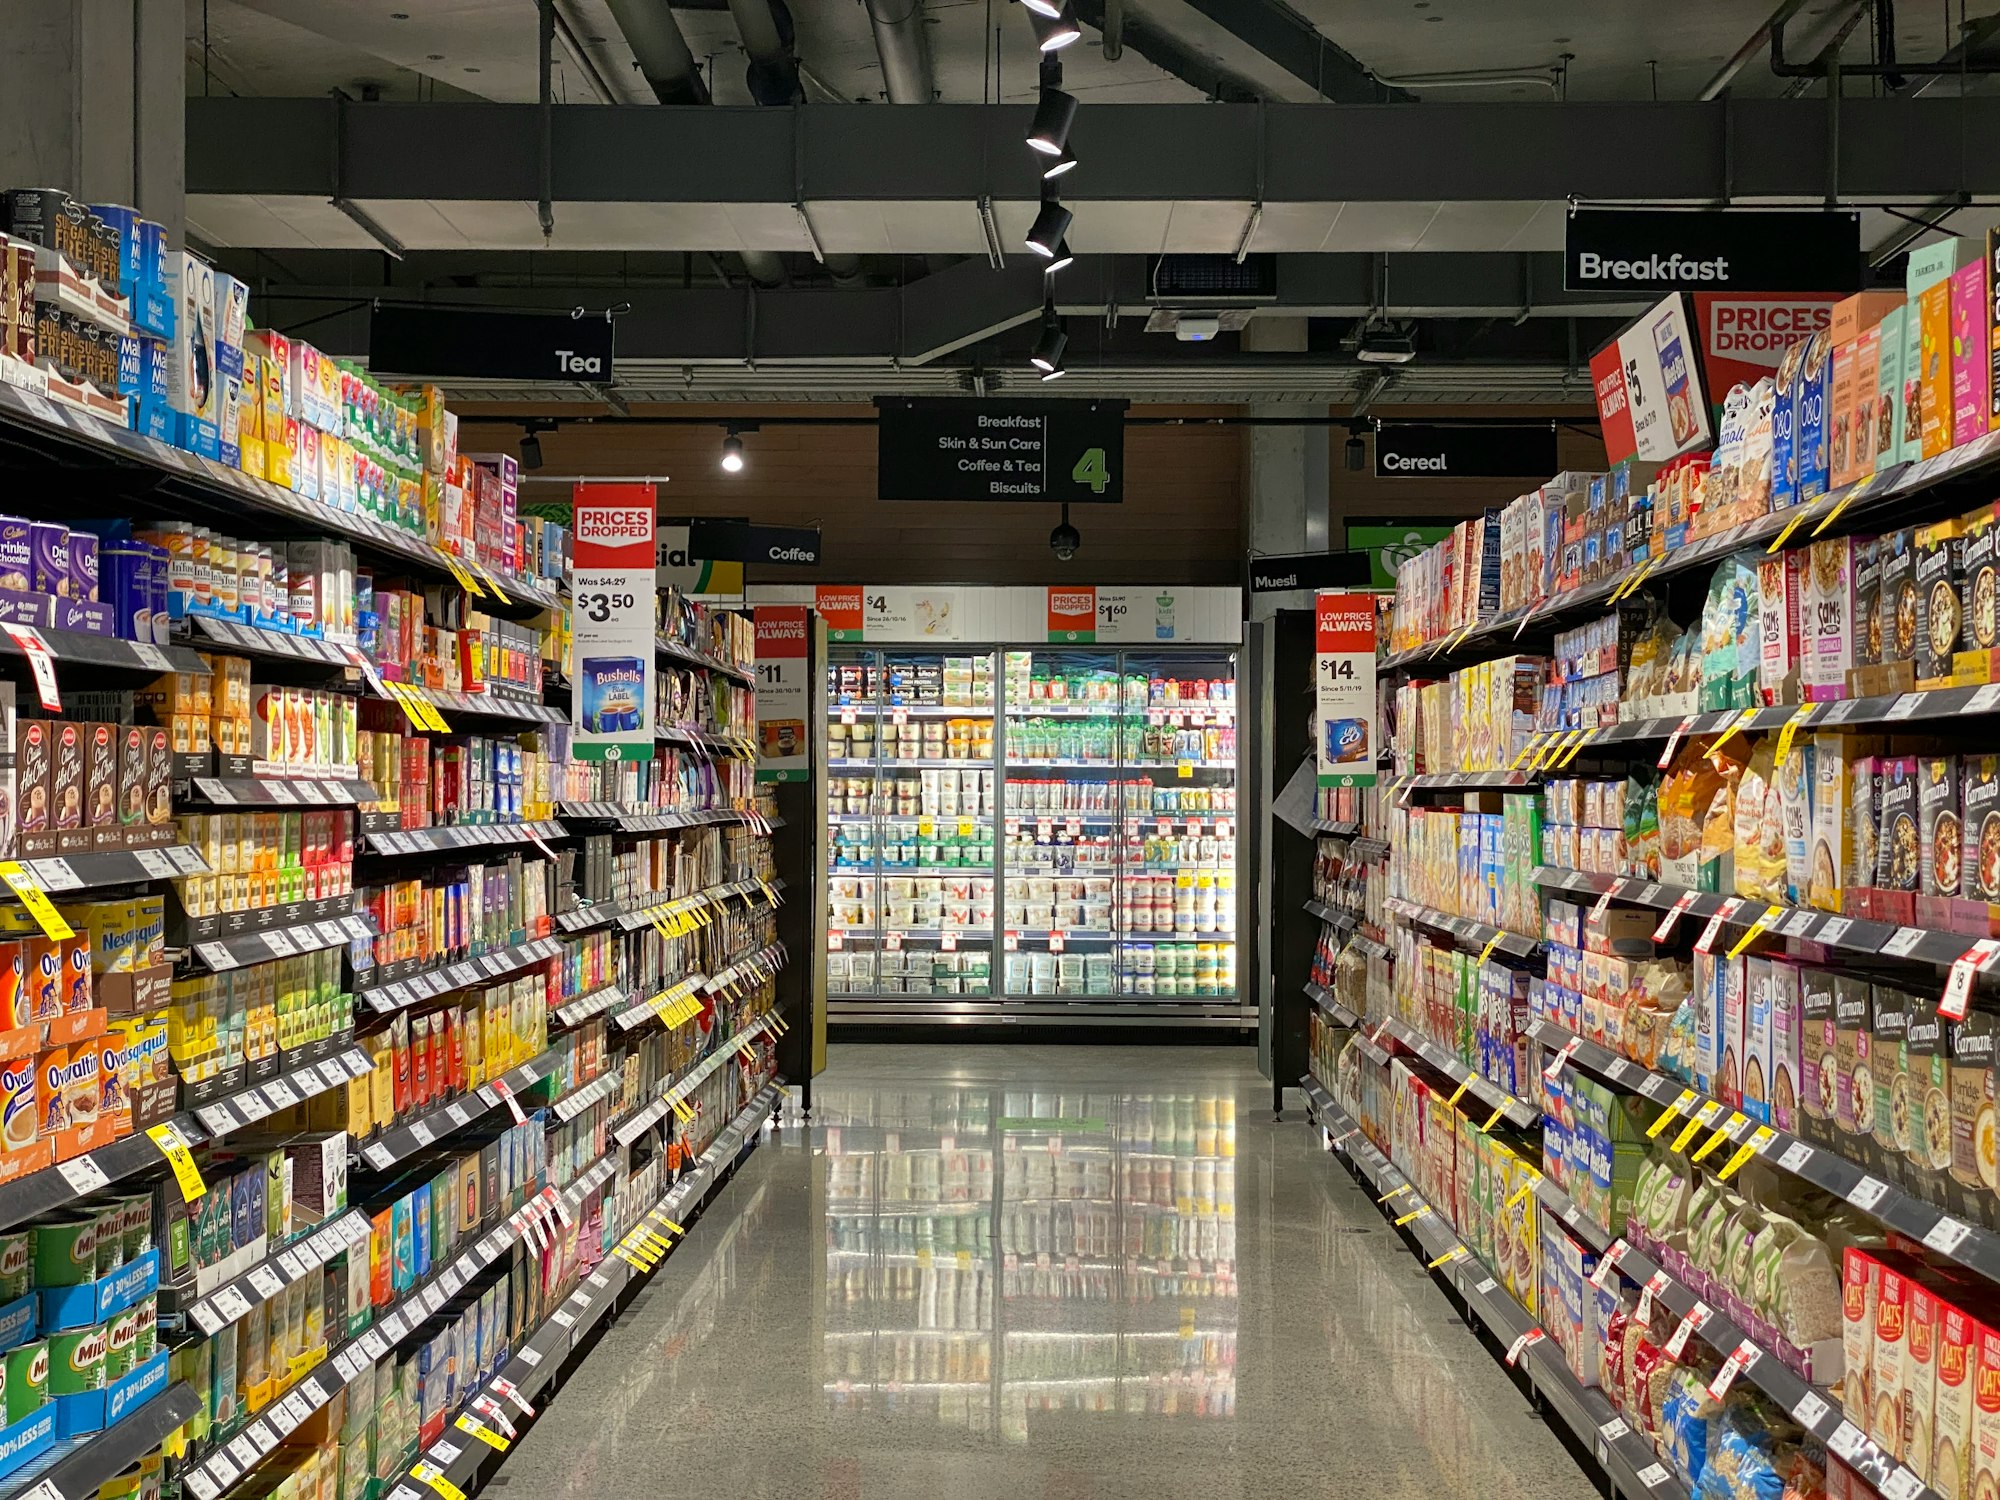 aisle, food, cheese, dairy refrigeration, cookies, biscuit, cereal, tea, coffee, yogurt, almond, rice, soy milk rice, spice, sauce, cereal, quick milk, store shelf shelf,  store, supermarket, supermarket aisle